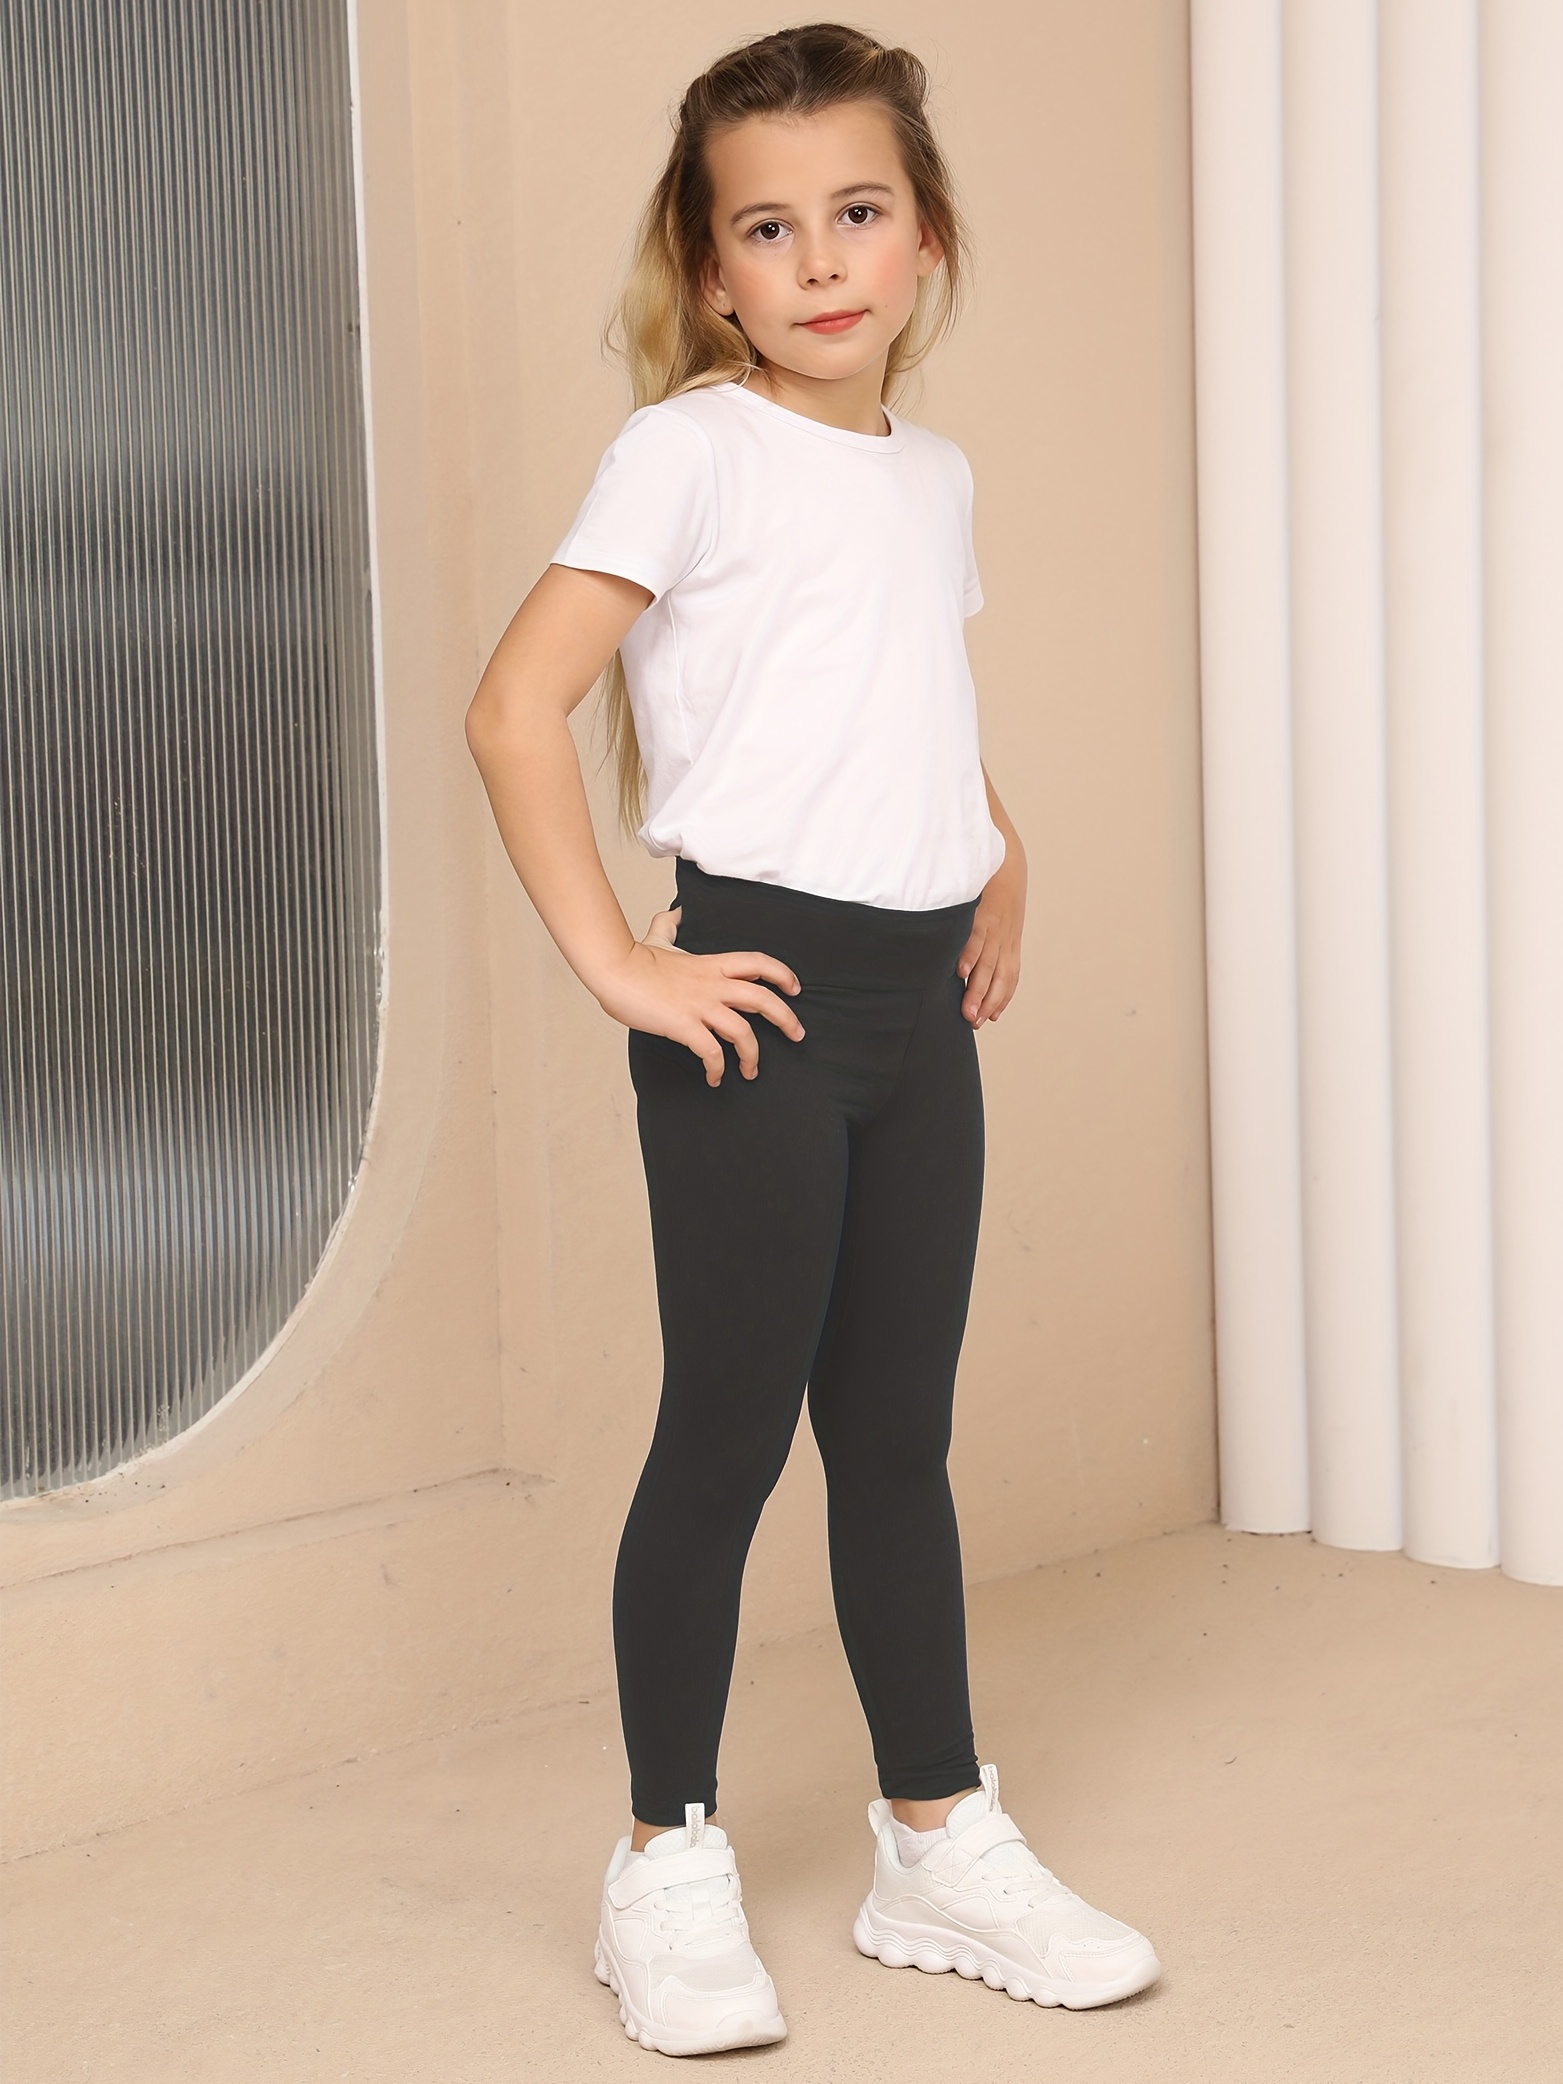 FNOCKS Girls Casual WEAR Cotton Lycra Formal Pant/Jegging/Tights